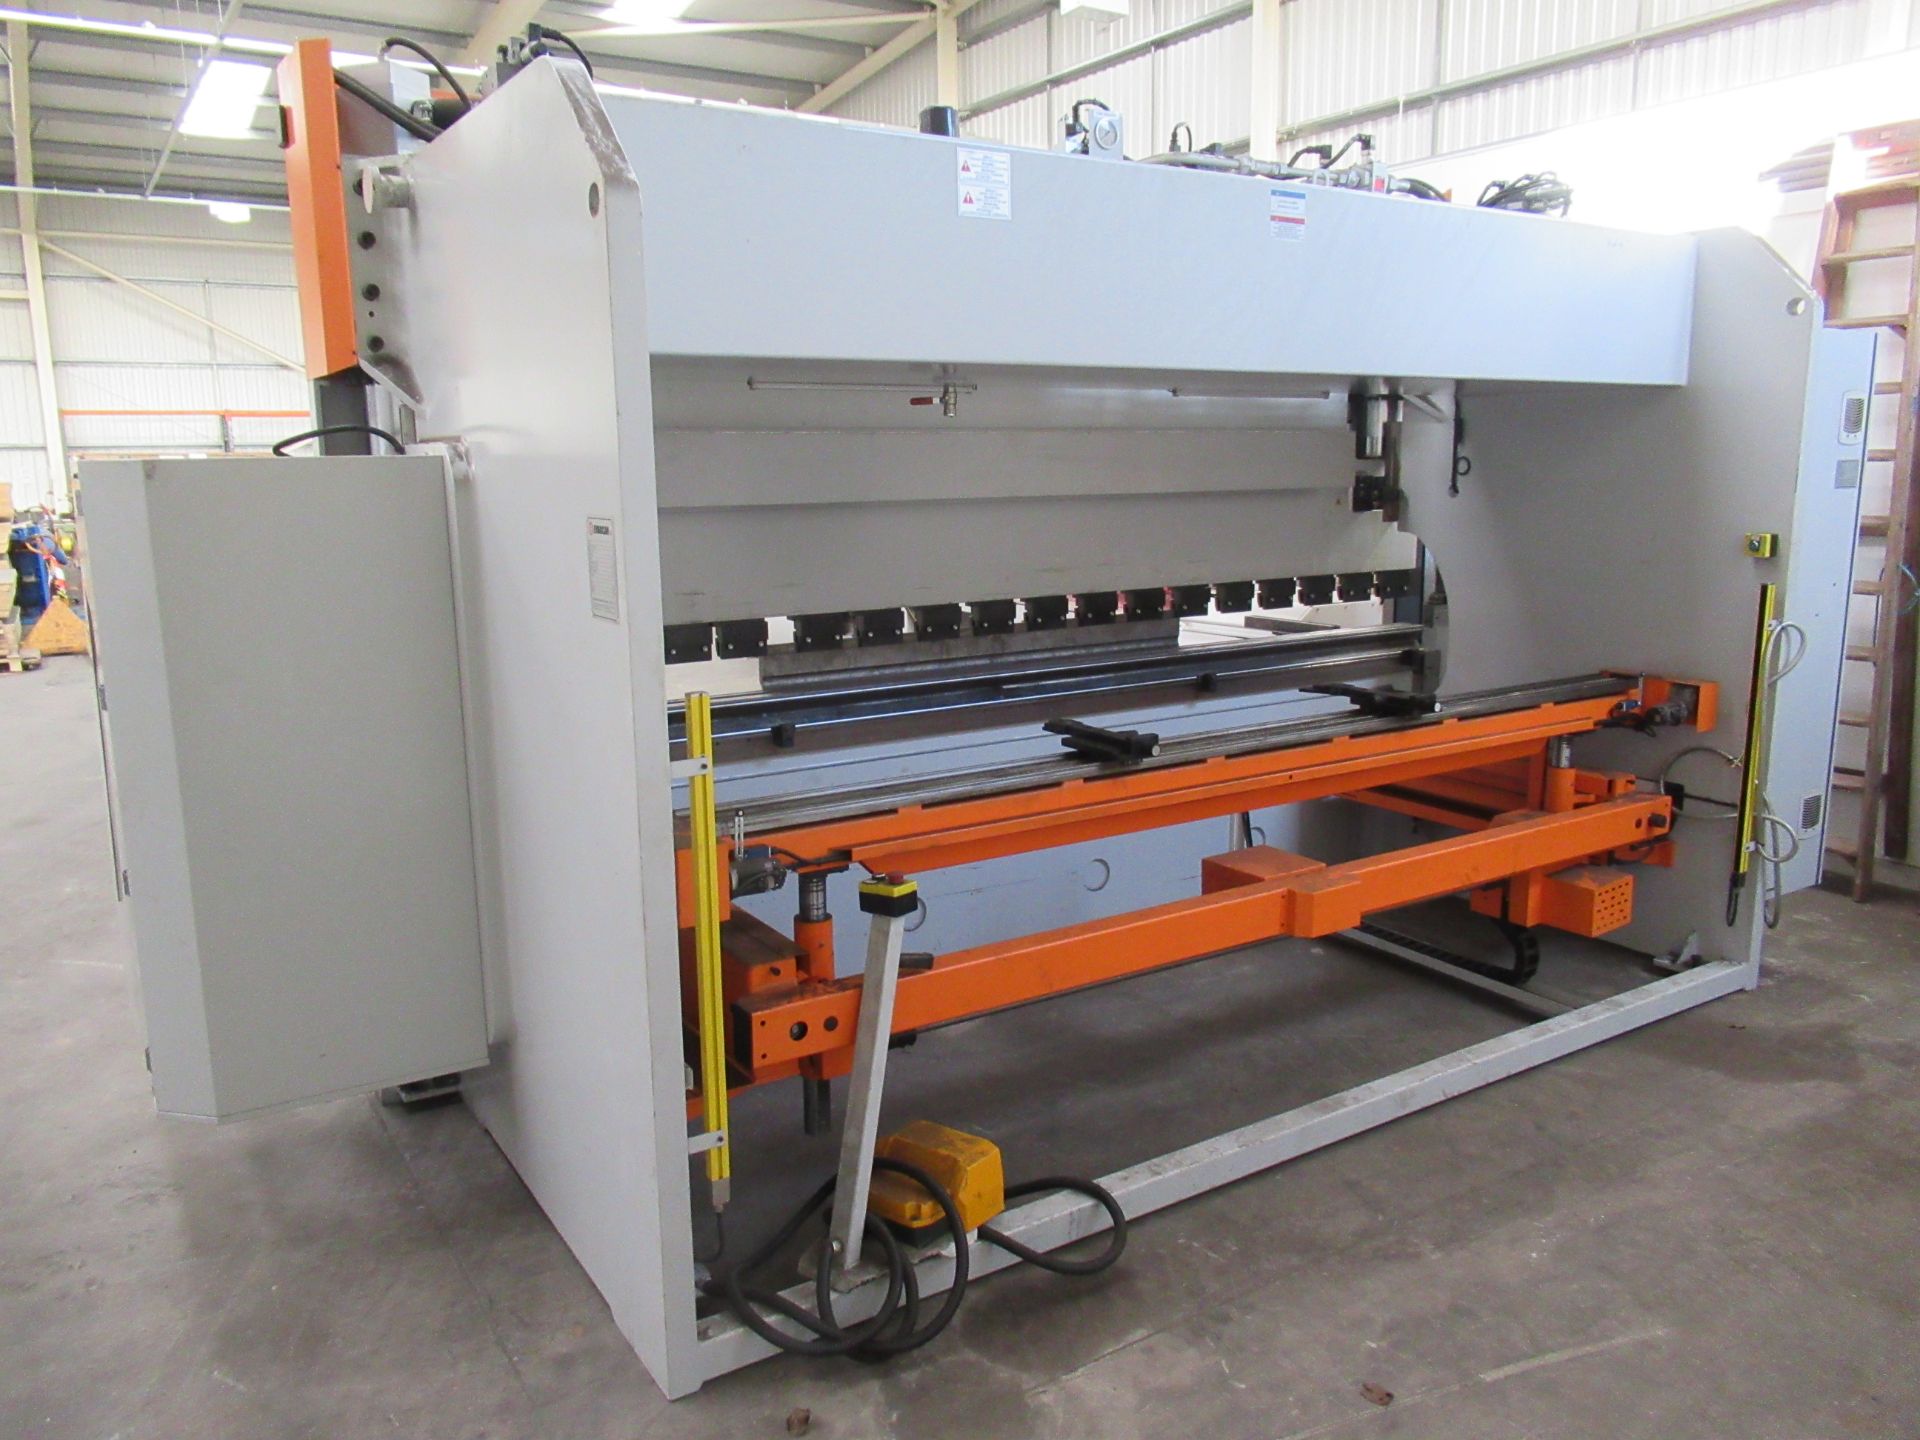 Ermaksan Speed-bend Pro 4100 x 220 CNC Hydraulic Press Brake and a selection of tooling for press br - Image 4 of 16